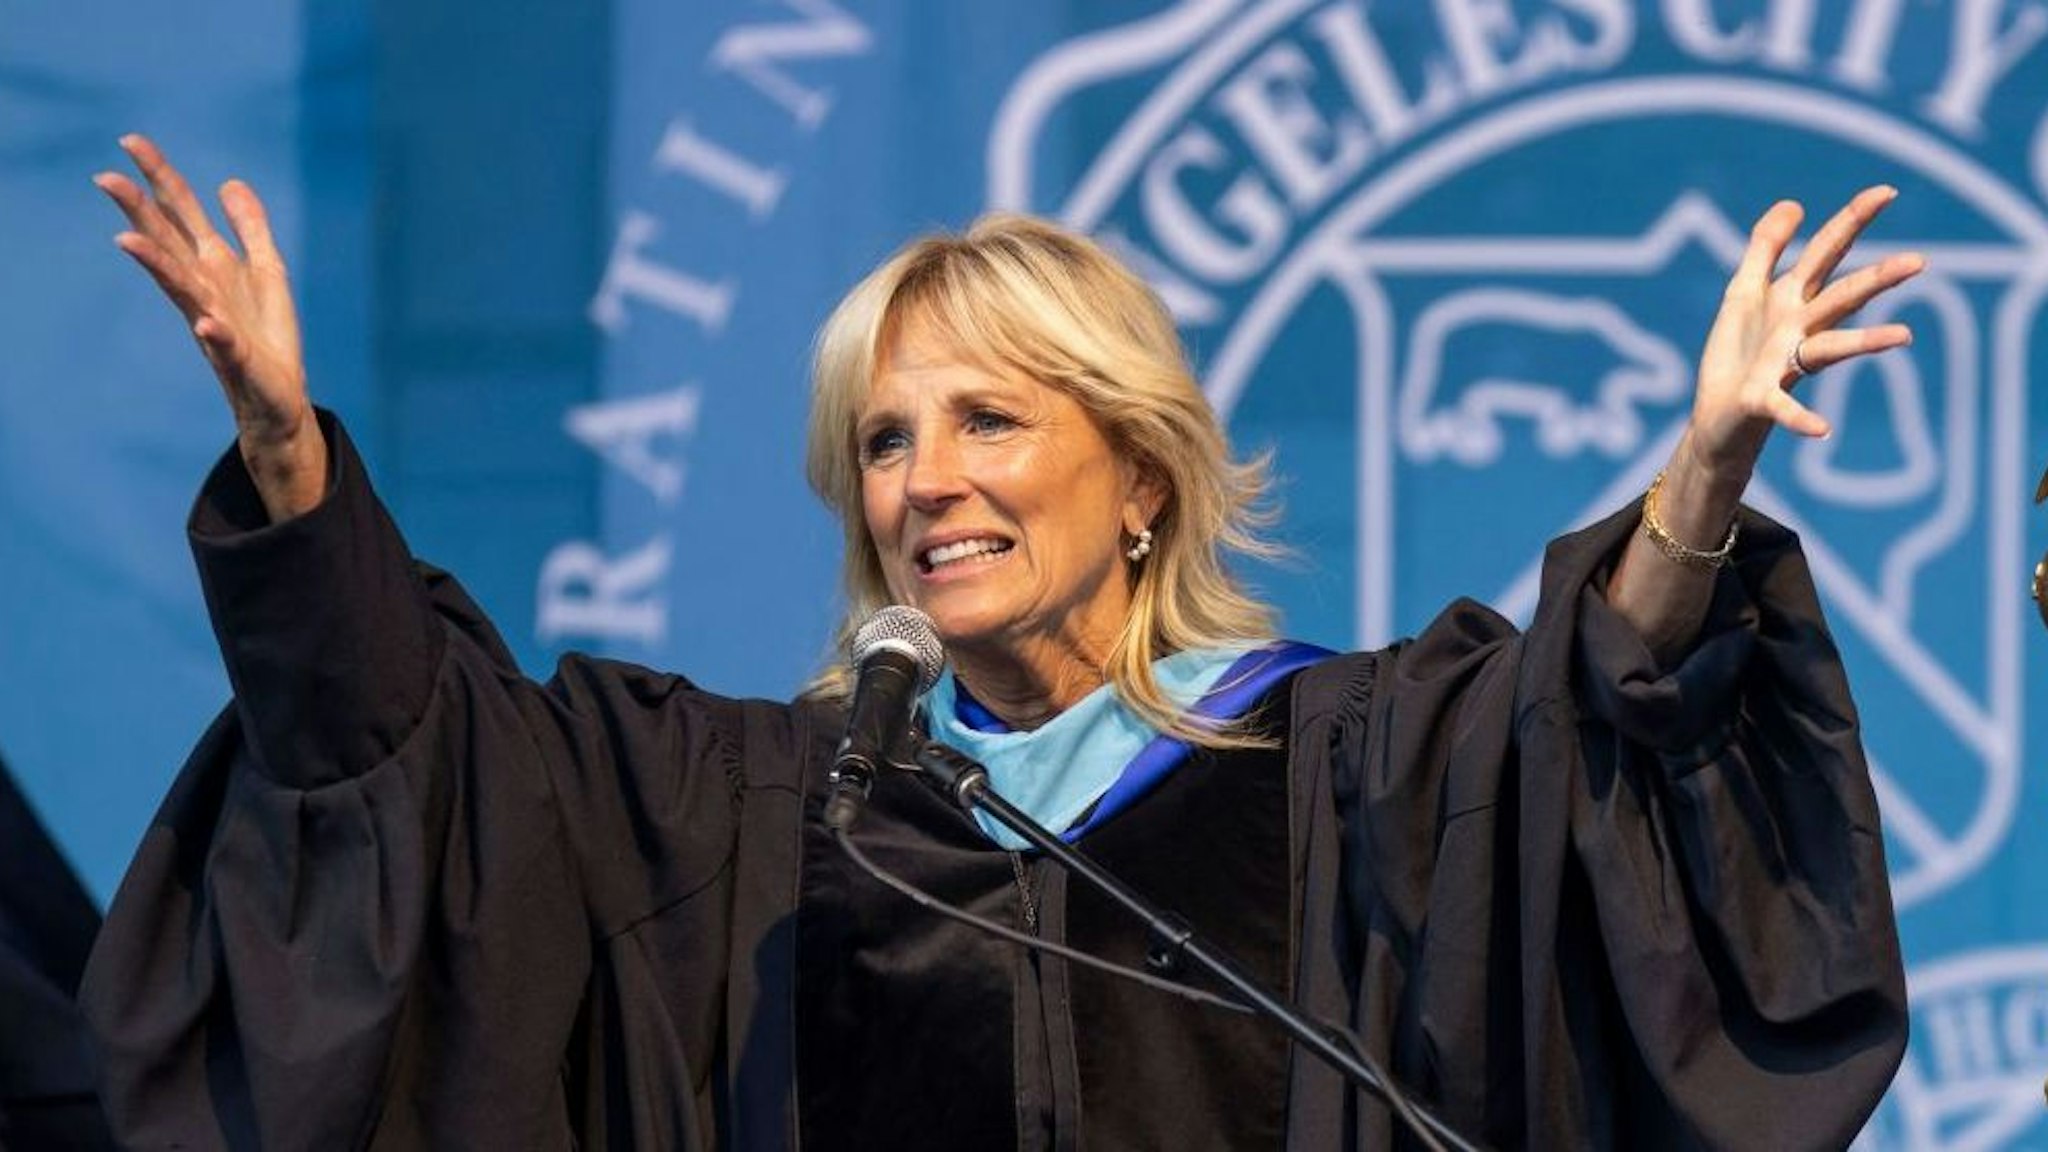 US First lady Jill Biden delivers the keynote address at the Los Angeles City College commencement ceremony at the Greek Theater in Los Angeles, California on June 7, 2022. - The First Lady is also attending events at the Ninth Summit of the Americas, occurring this week, June 6-10, in Los Angeles.